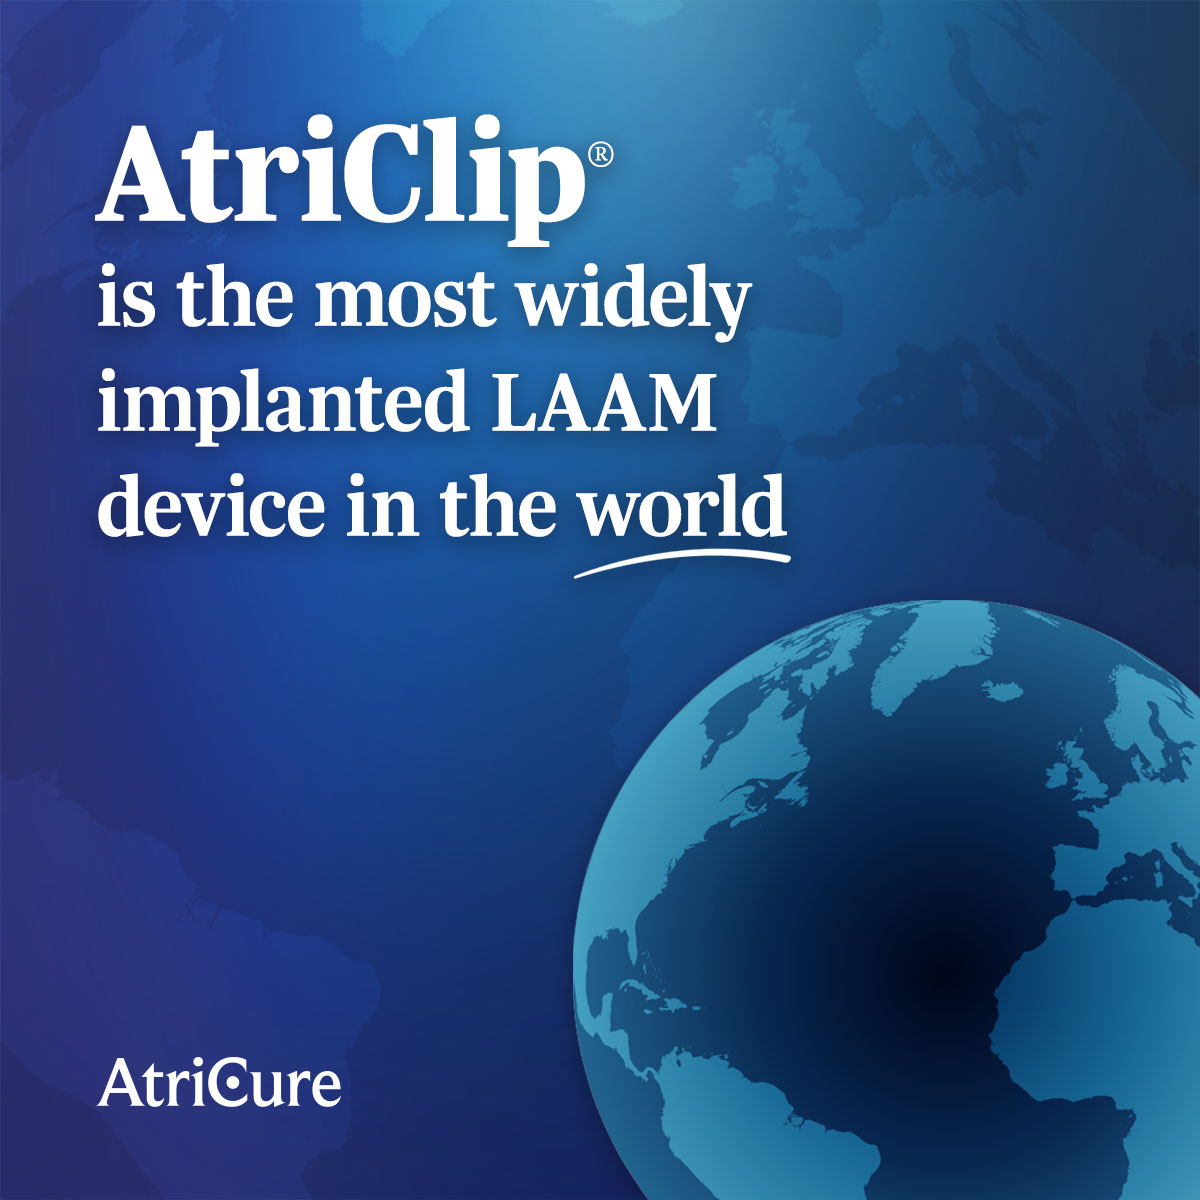 With features like dynamic closing force, tissue compression, & epicardial exclusion, AtriClip® devices are the most widely implanted LAAM devices worldwide. Learn more about the benefits of #LAAE by stopping by booth #905 at AATS or visit: okt.to/Cbfcp3 #CardioTwitter